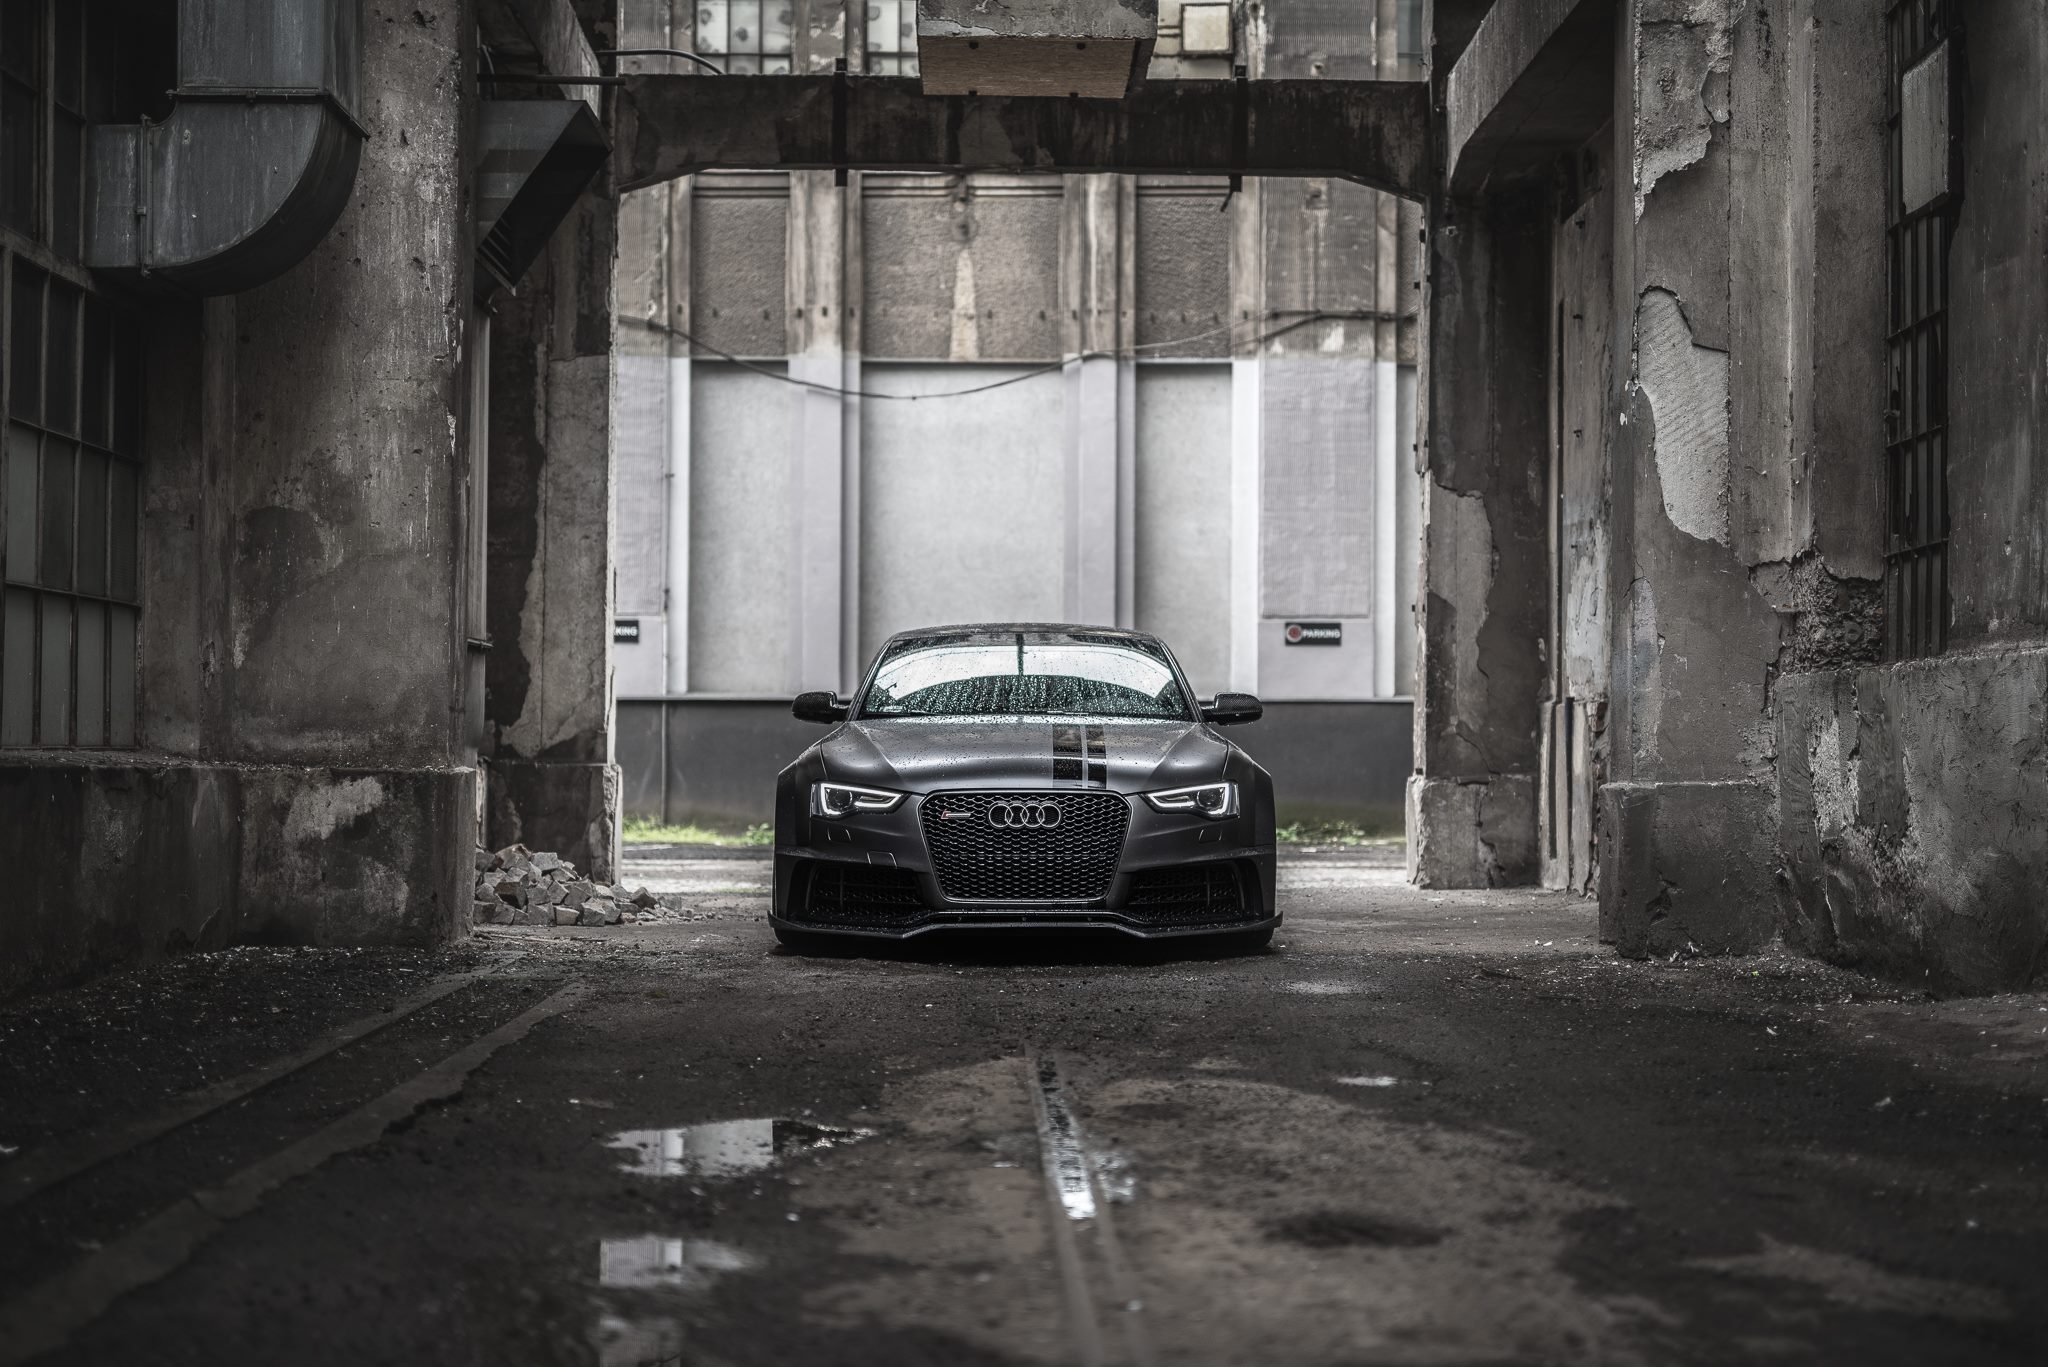 Supercharged Audi S5 SR66 wide body kit